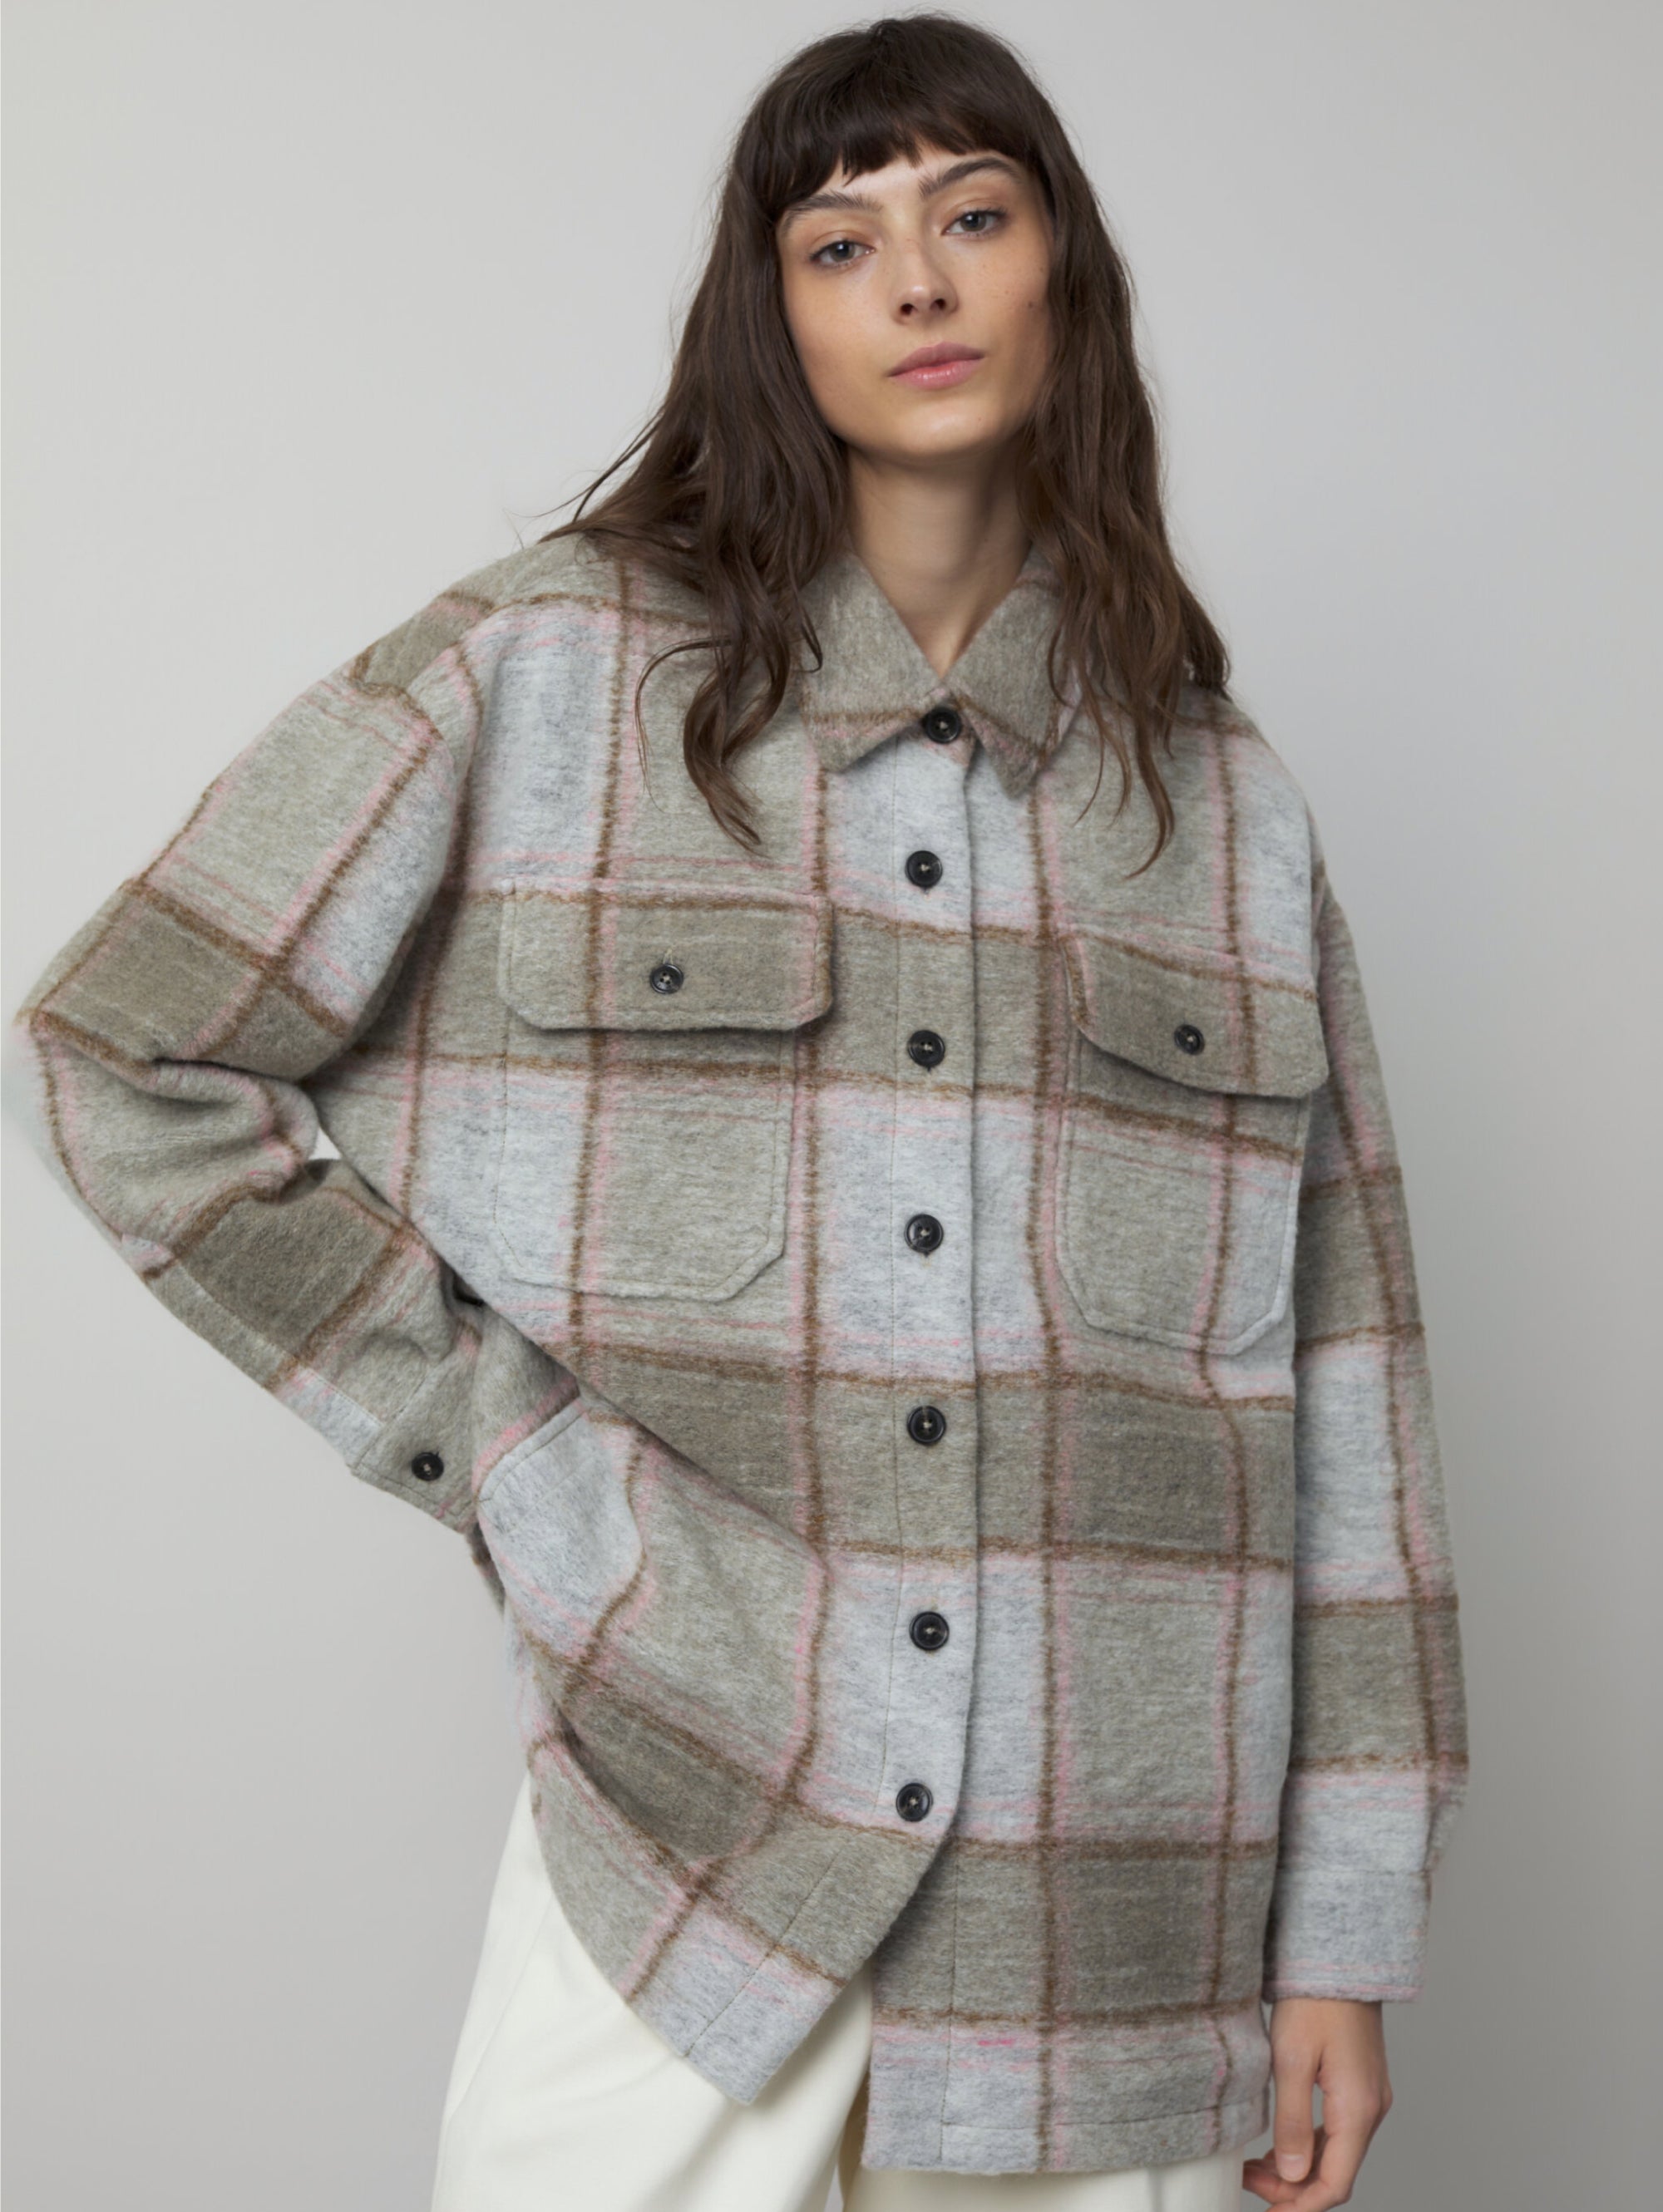 CLOSED-Overshirt Check Multicolor-TRYME Shop